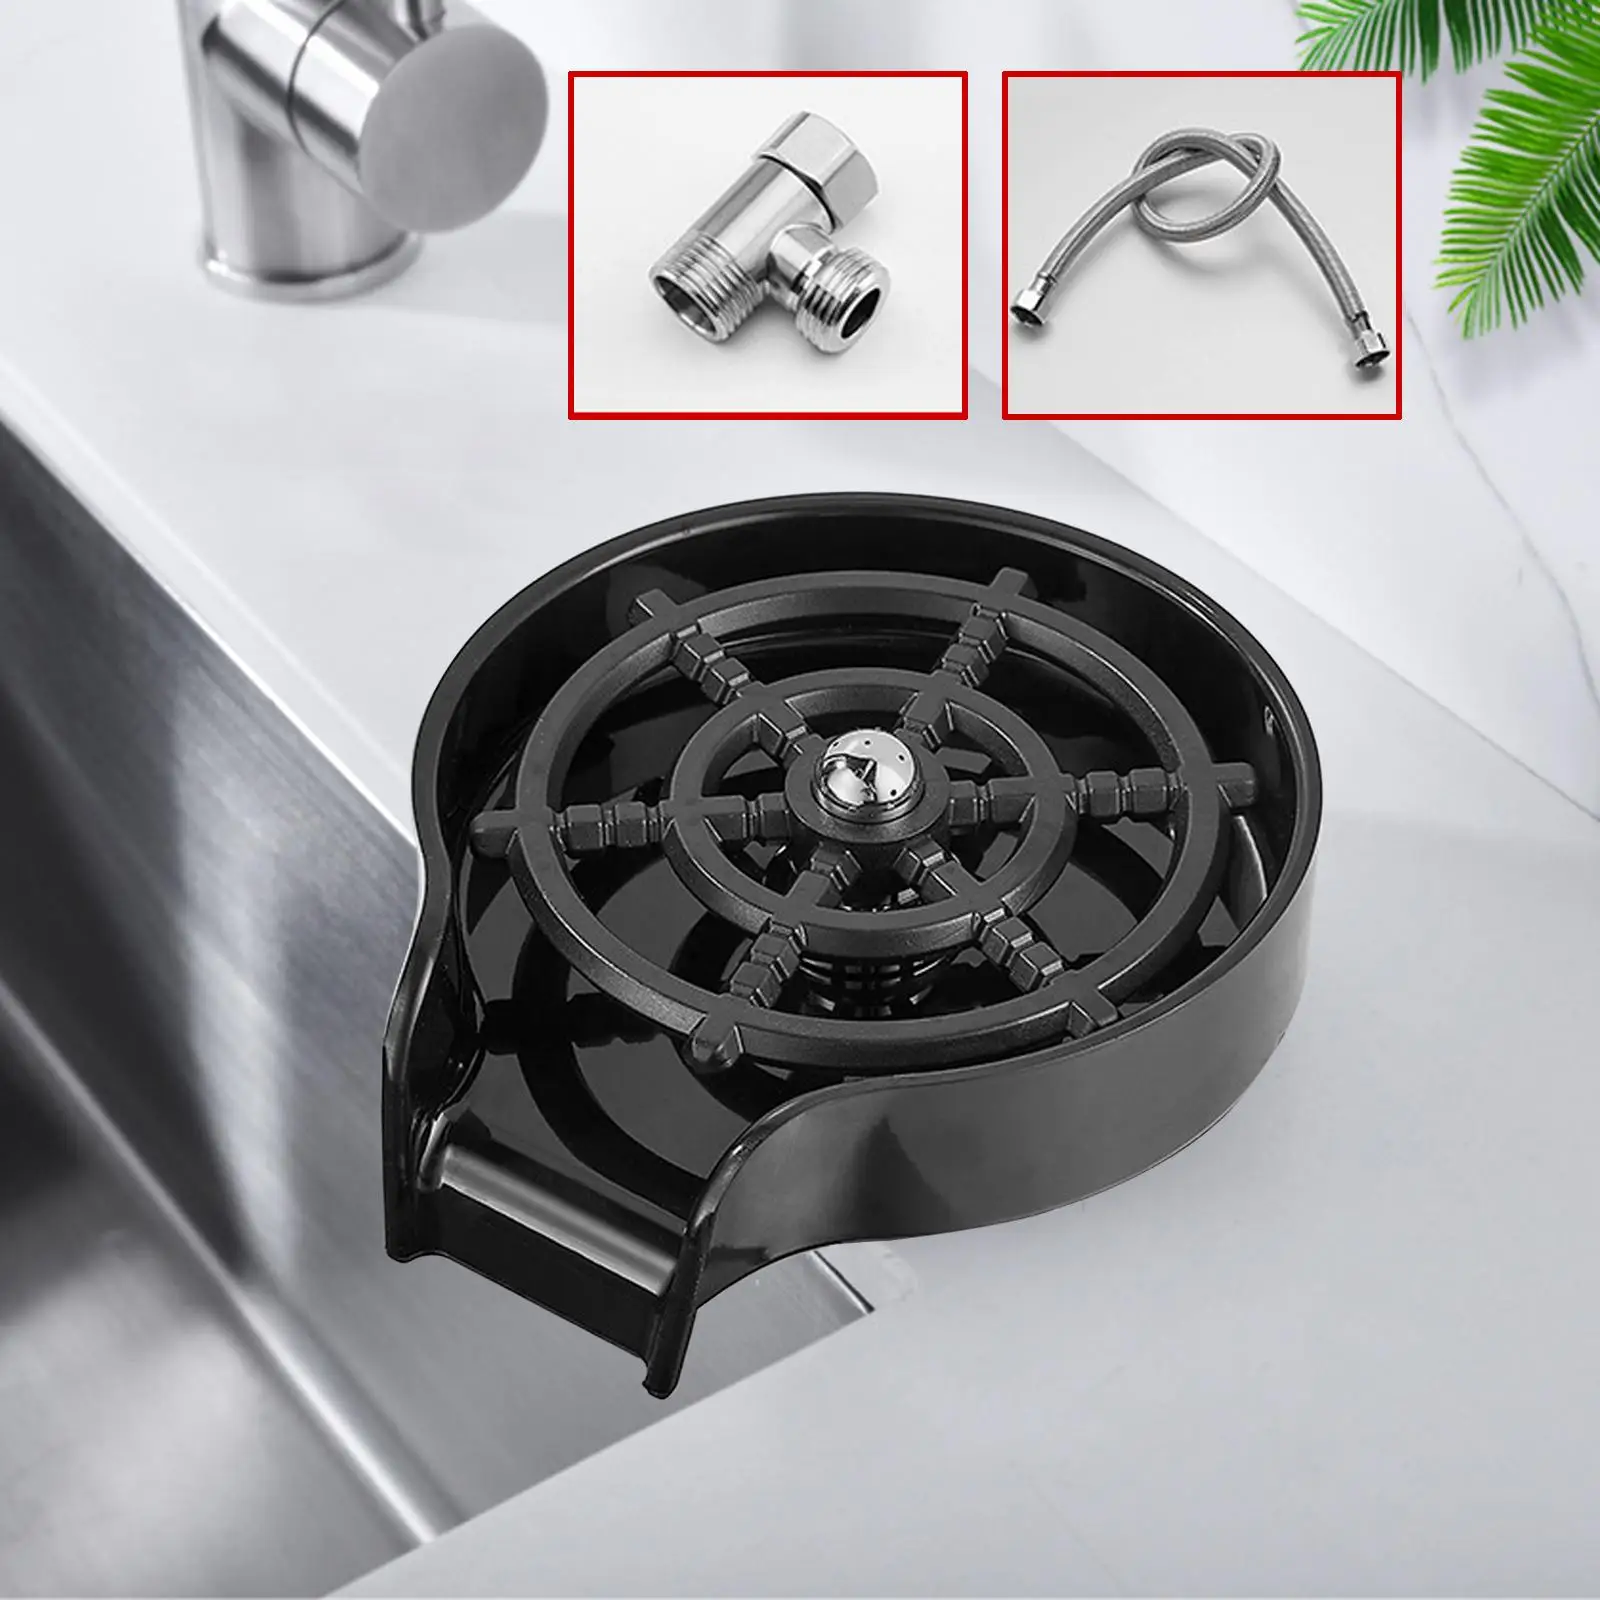 Stainless Steel High Pressure Cup Washer milk cups Washer Kitchen Sink Bottle Washer Automatic rinser for Glass Cleaner